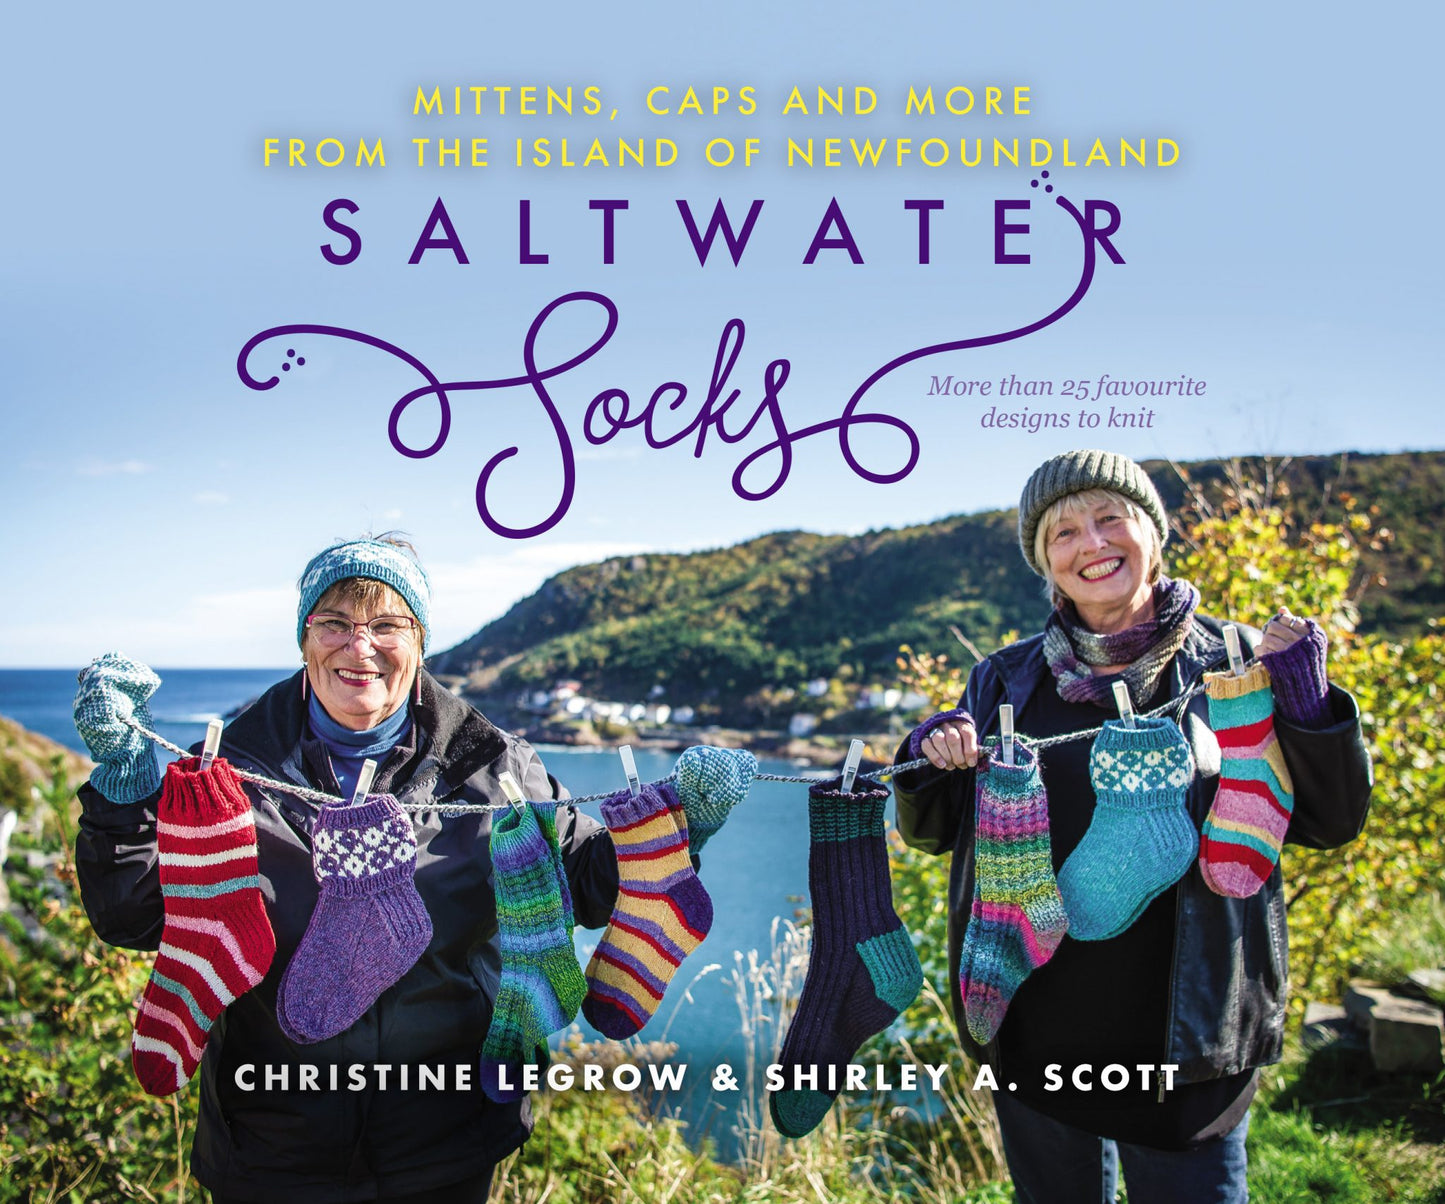 Saltwater Socks: Caps, Mittens & More From the Island of Newfoundland  by Christine LeGrow and Shirley A. Scott